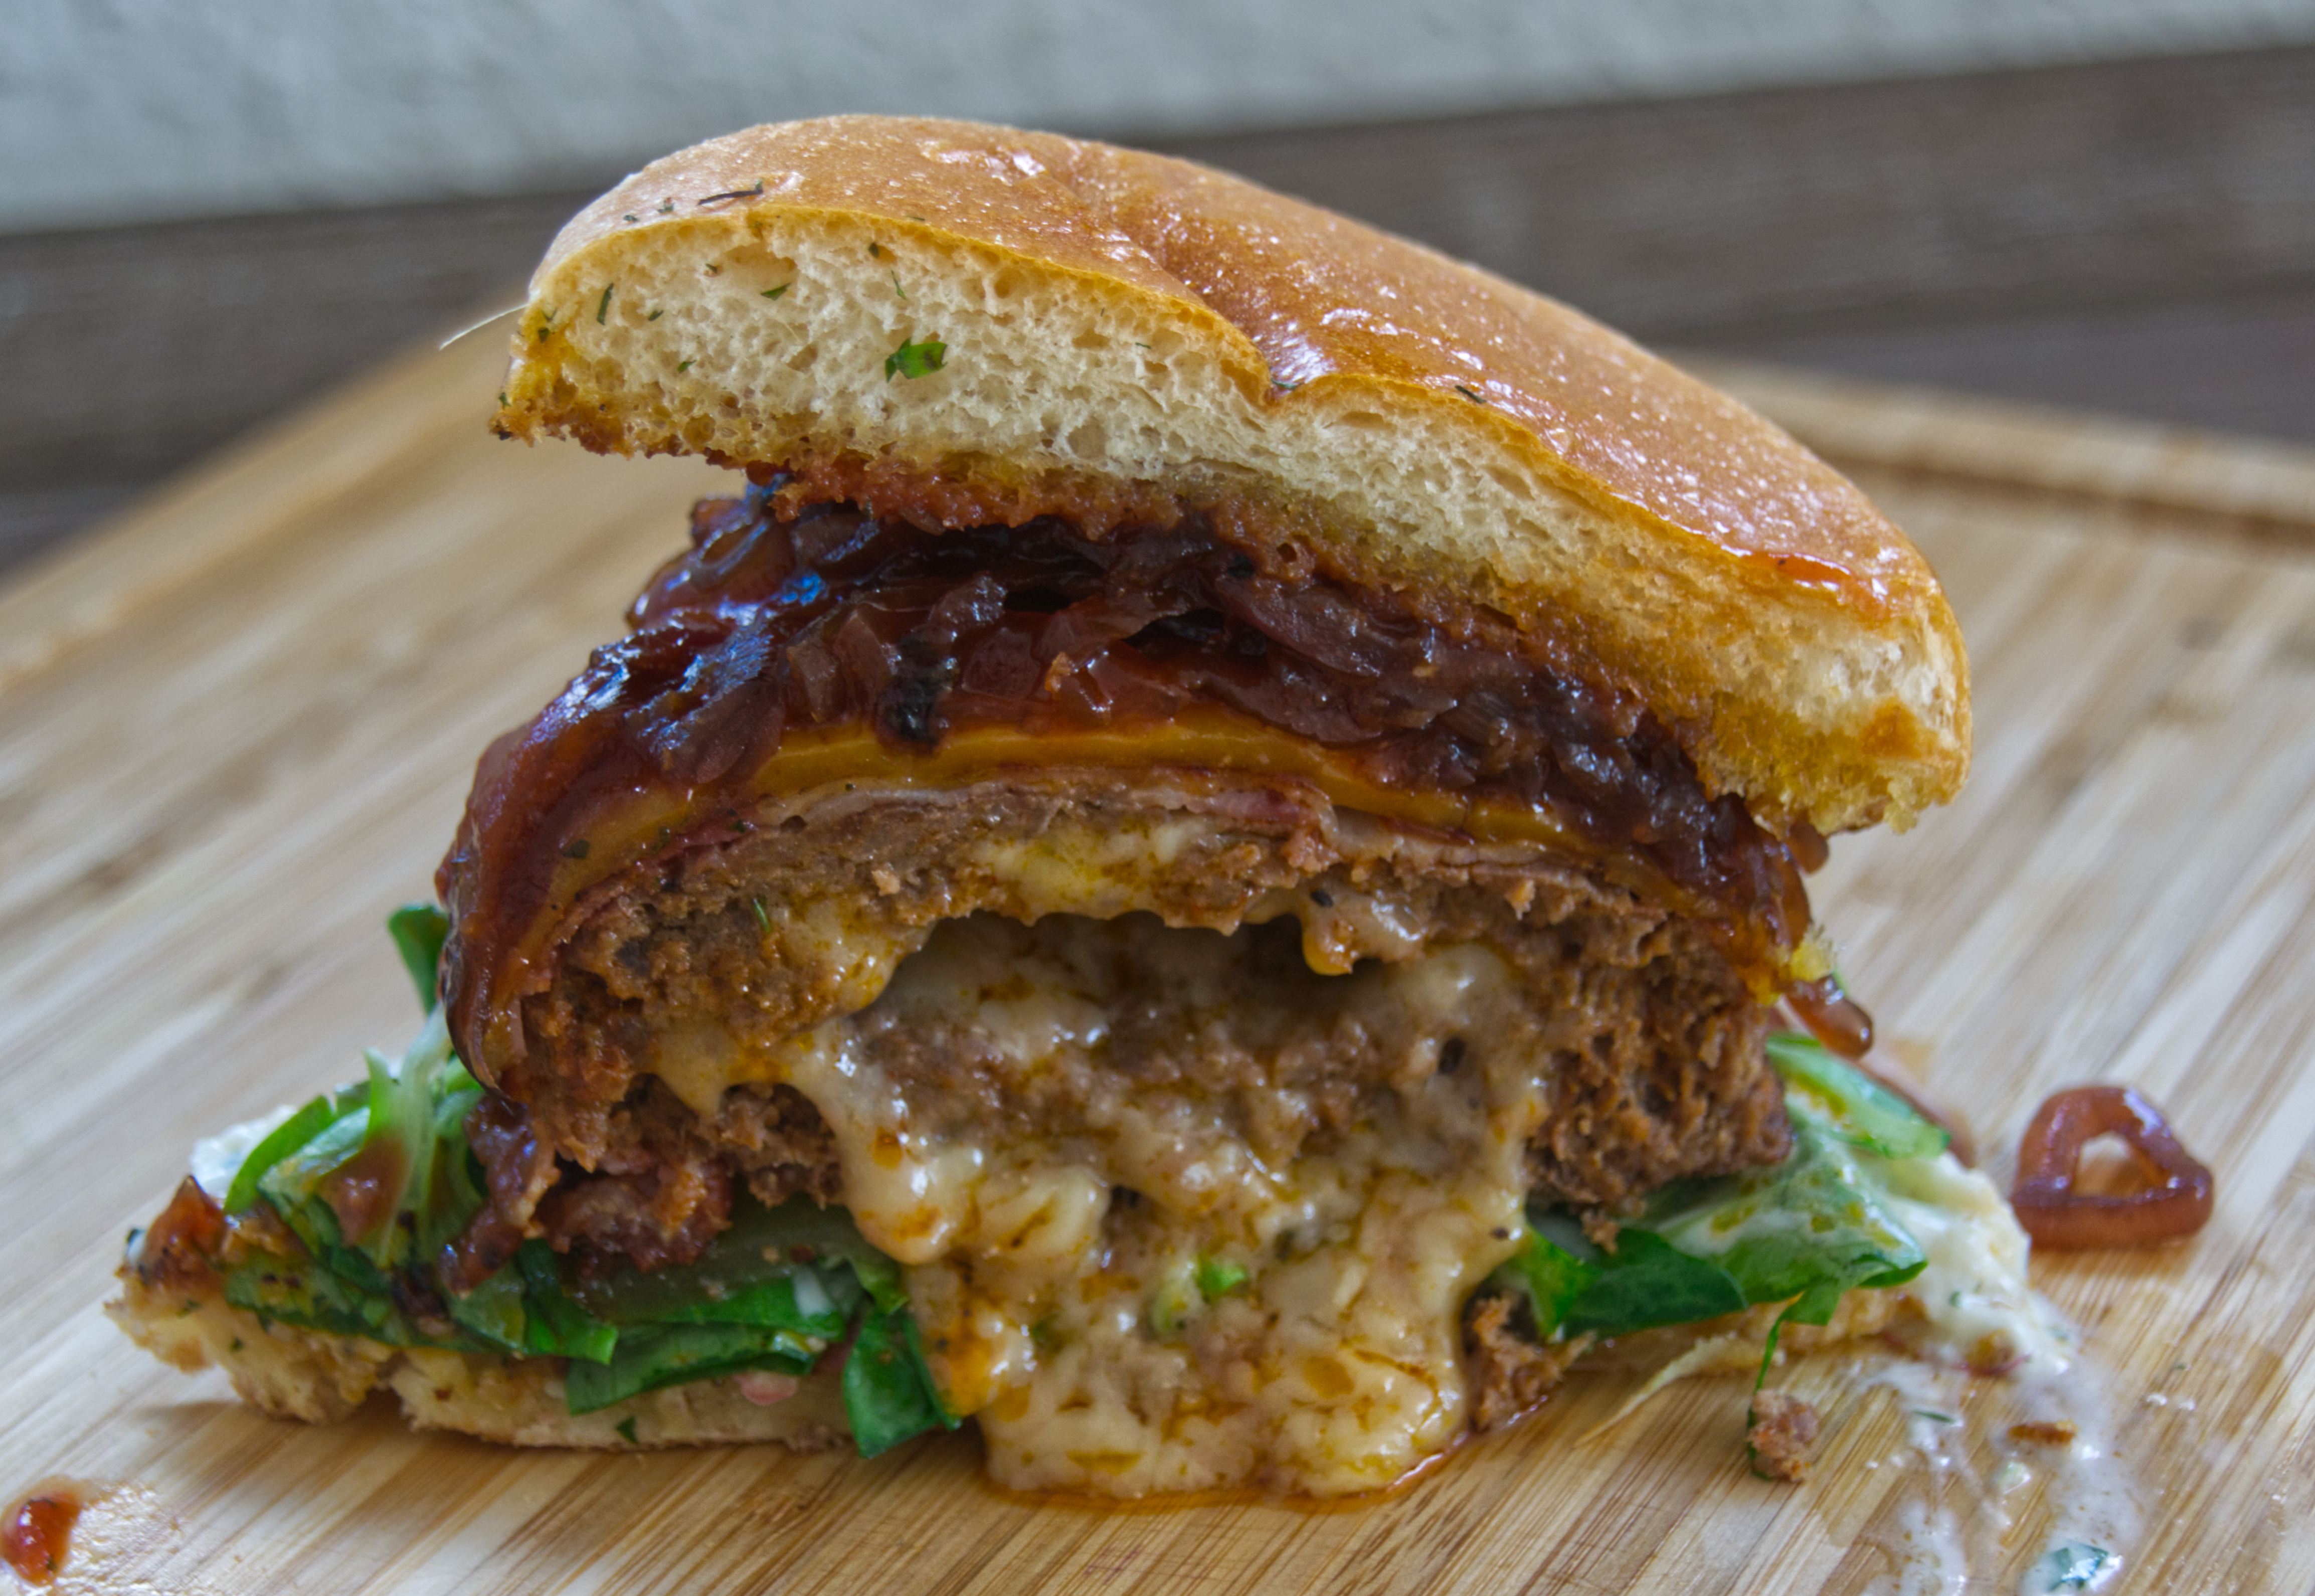 Cheddar Bacon Bomb Burger with its melted cheese core. It tastes as good as it looks.